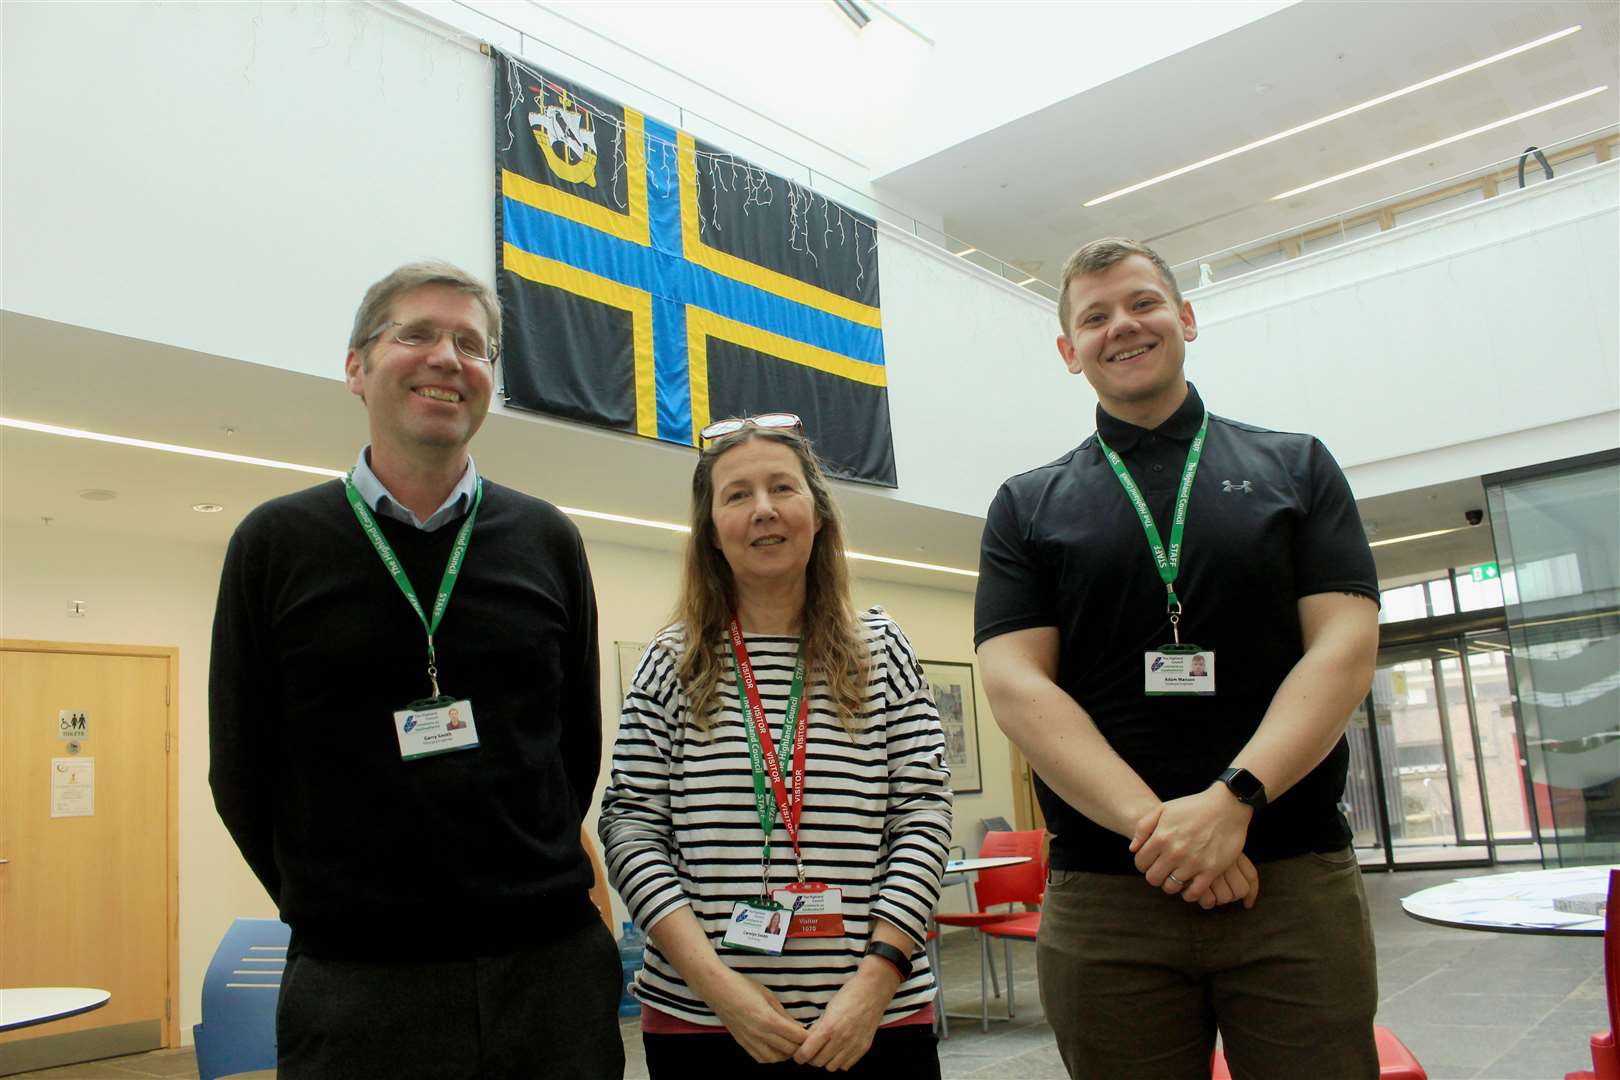 From left: Garry Smith, lead officer for infrastructure; Carolyn Smith, senior technician; and Adam Manson, graduate engineer, under the Caithness flag at the Wick town centre drop-in session on Friday.